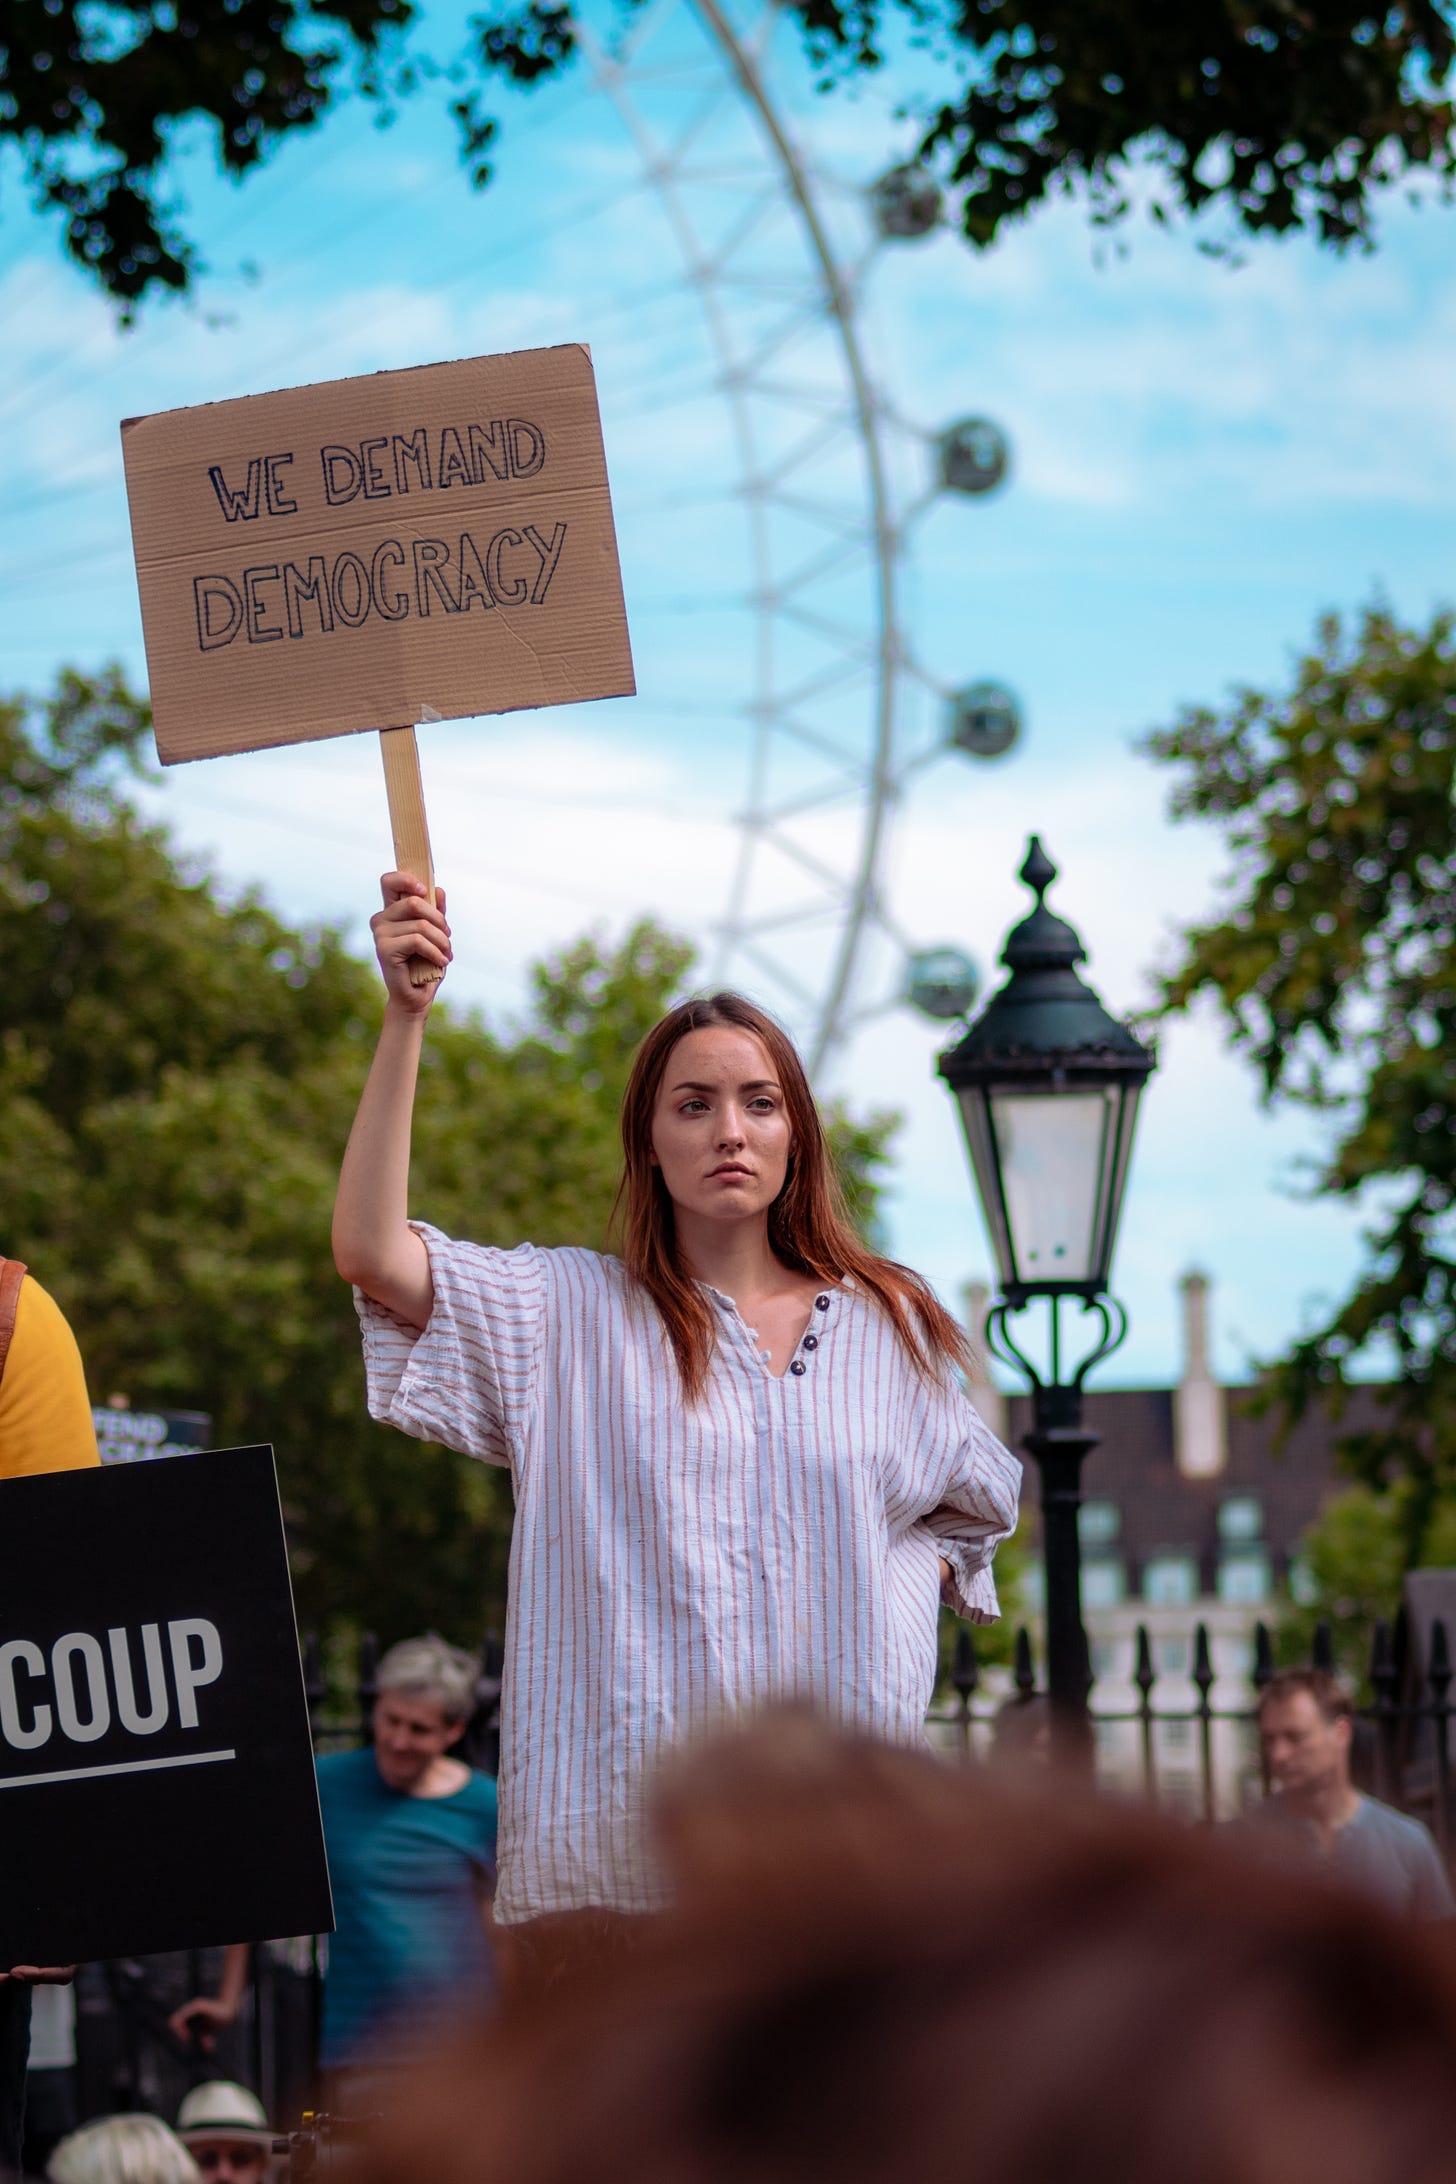 A photo of a young woman at a rally in London with a sign demanding democracy